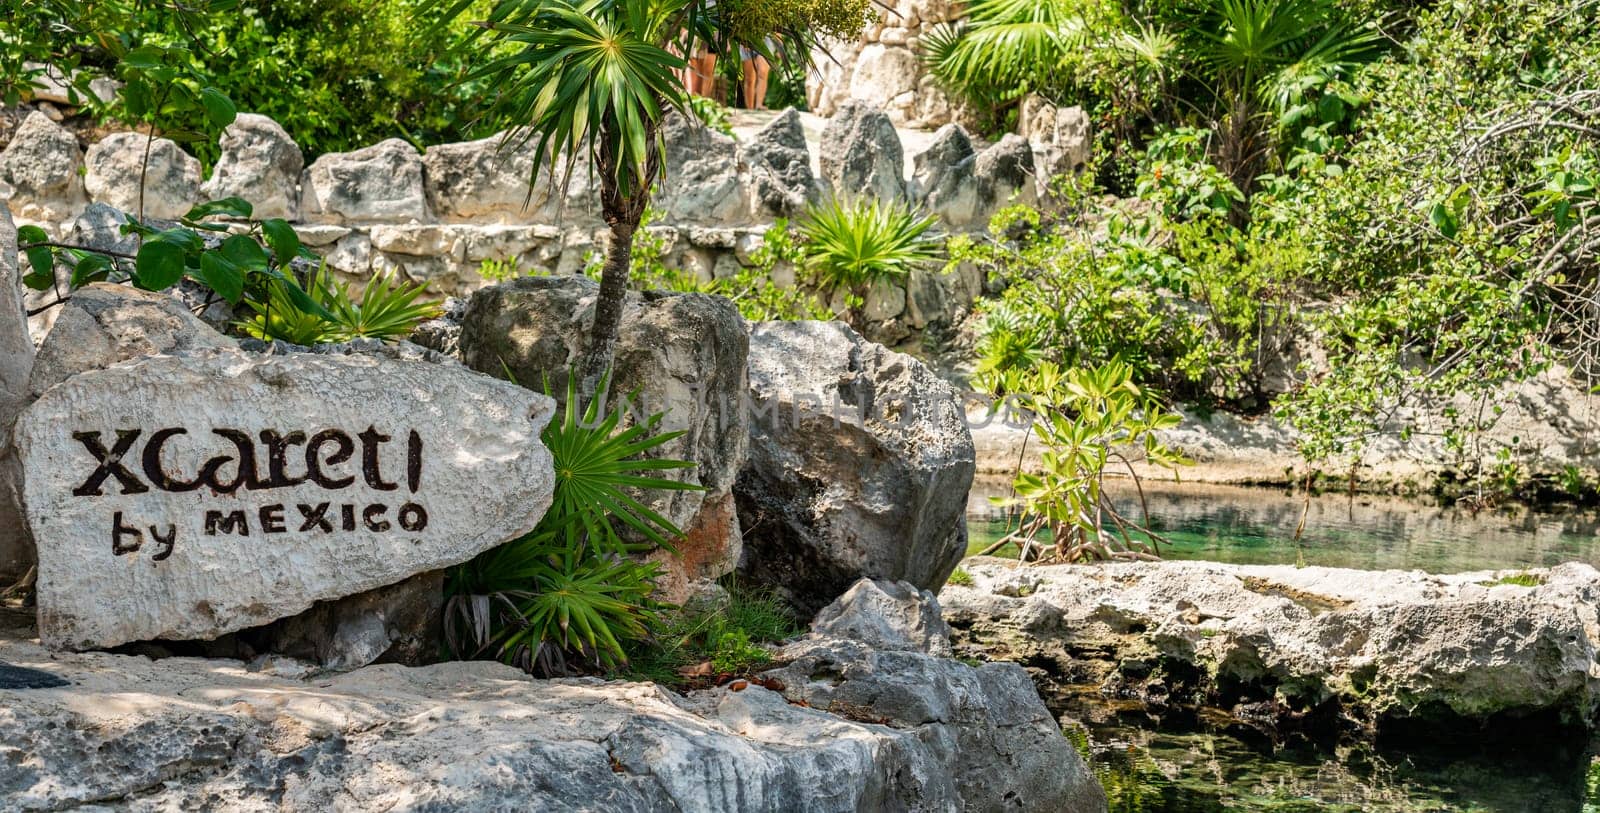 Cancun, Mexico - September 13, 2021: Xcaret theme park sign on big stone in Mexico by Mariakray